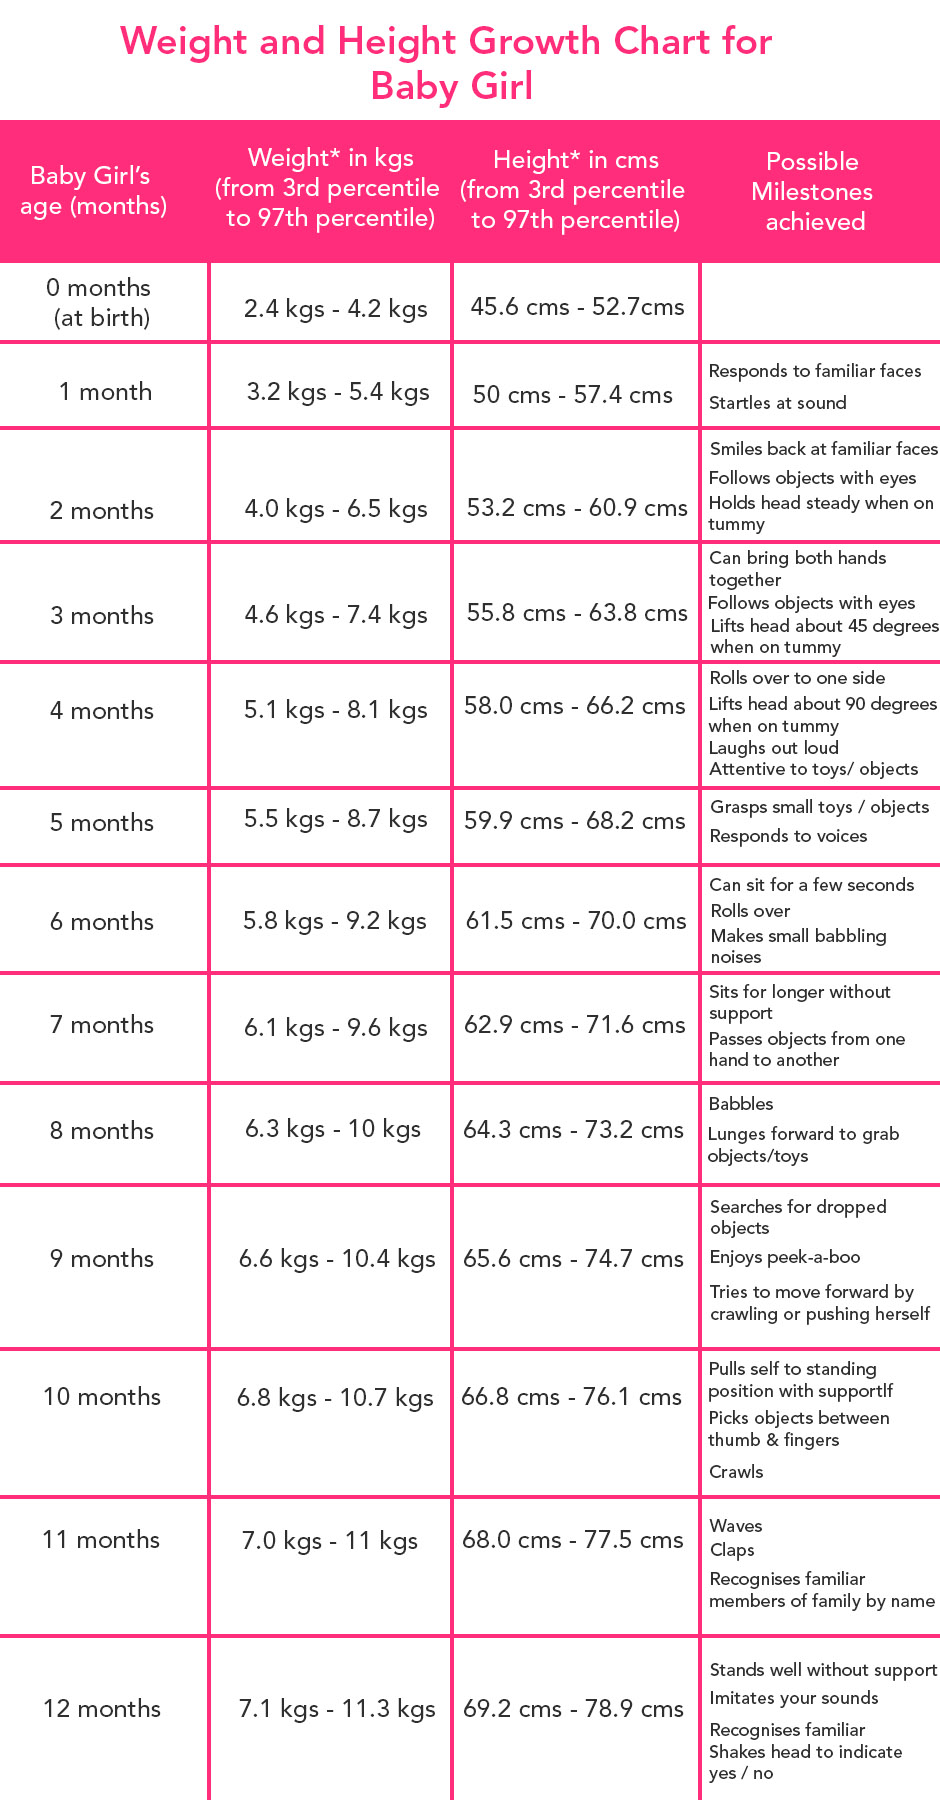 Weight And Height Growth Chart For A Baby Girl (0 to 12 months)